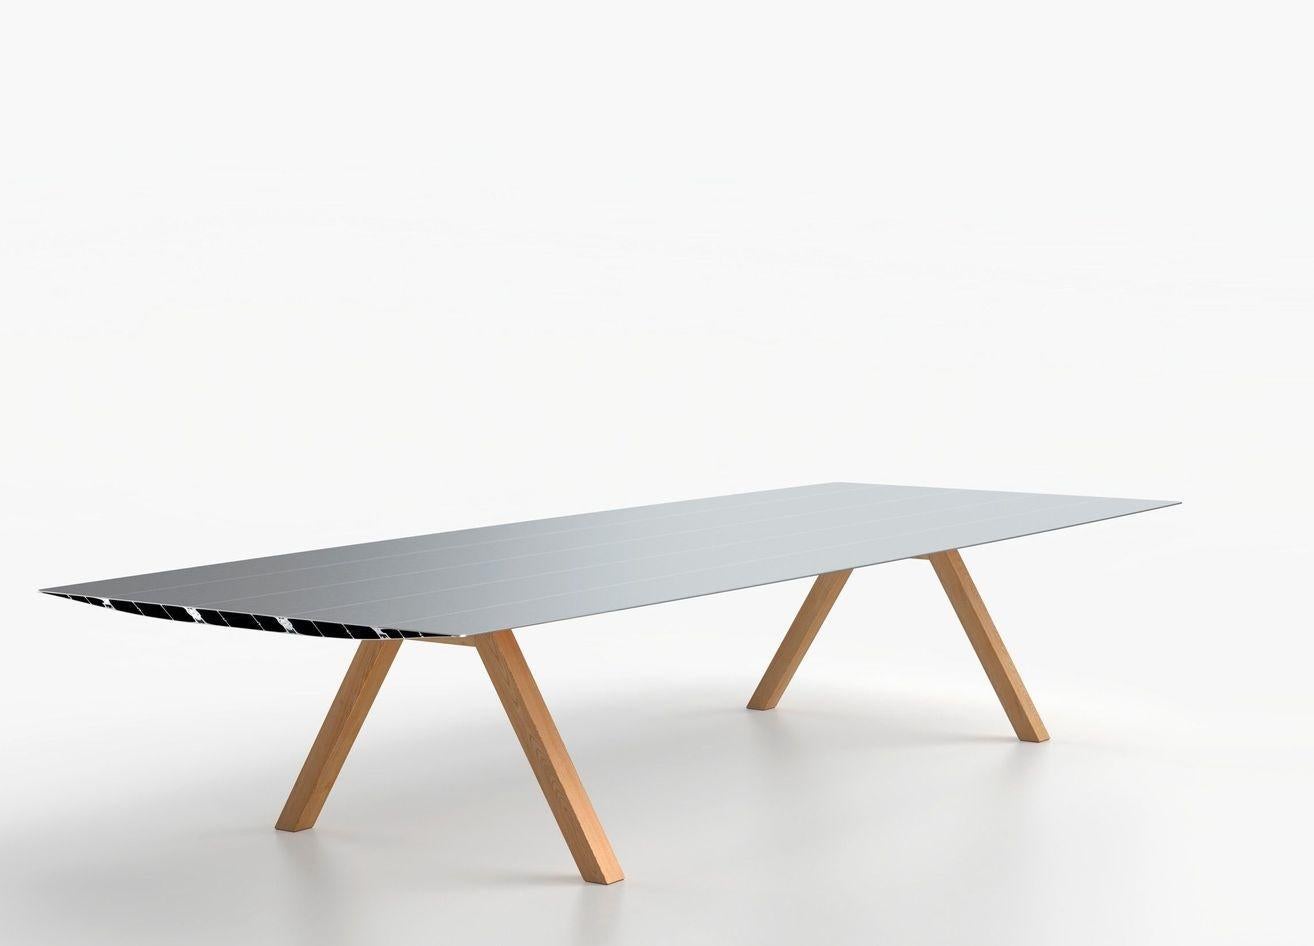 Big wood table B by Konstantin Grcic
Dimensions: D 150 x W 300 x H 74 cm 
Materials: Tabletop in extrusioned aluminium with open ends cut at 45º. There is the option of the surface being laminated in a natural oak effect with a varnished finish.